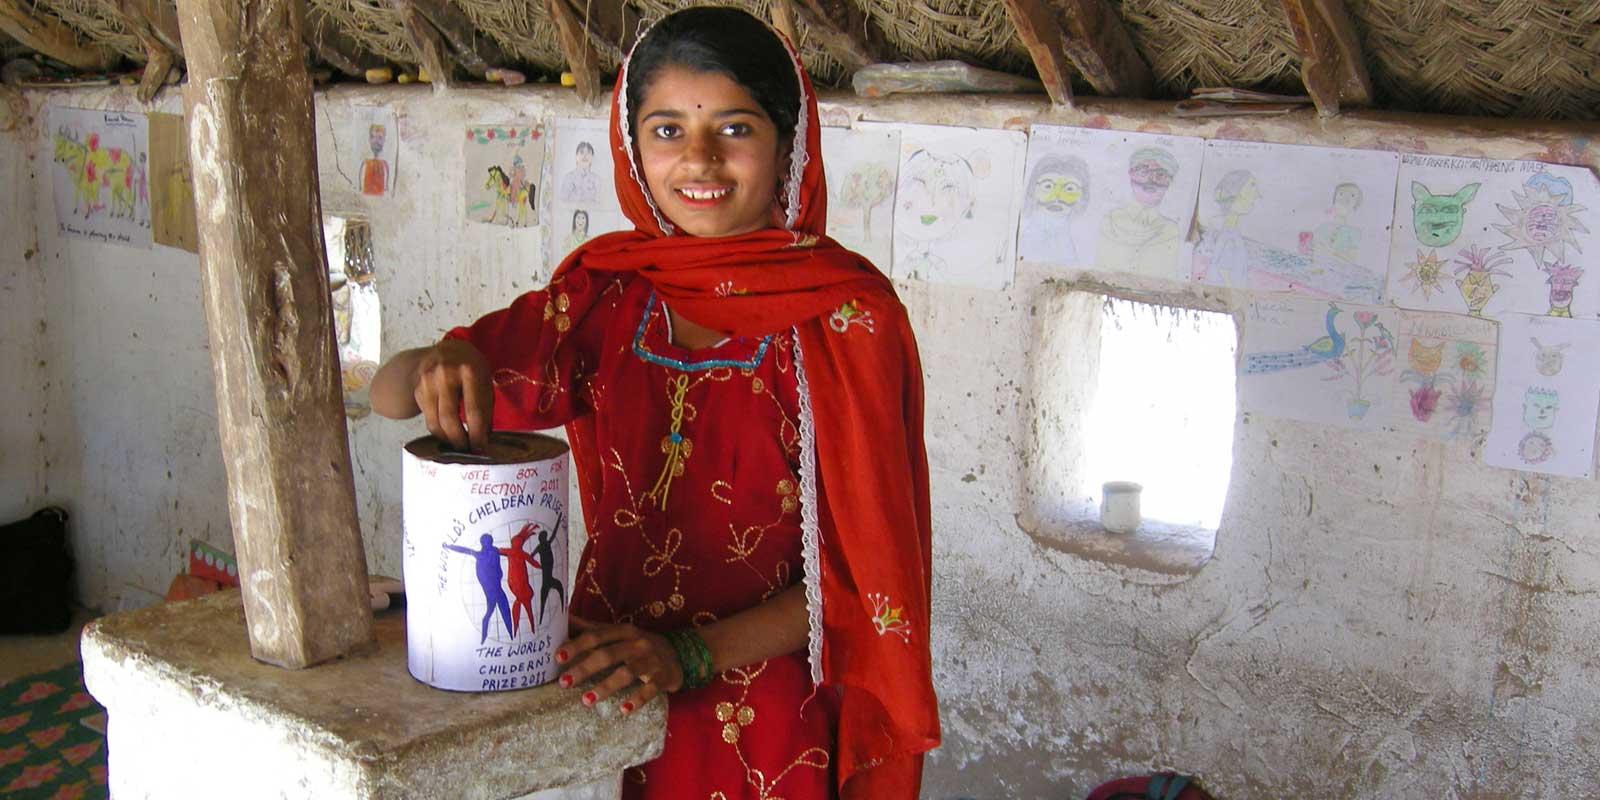 Girl putting vote in ballot box made of can